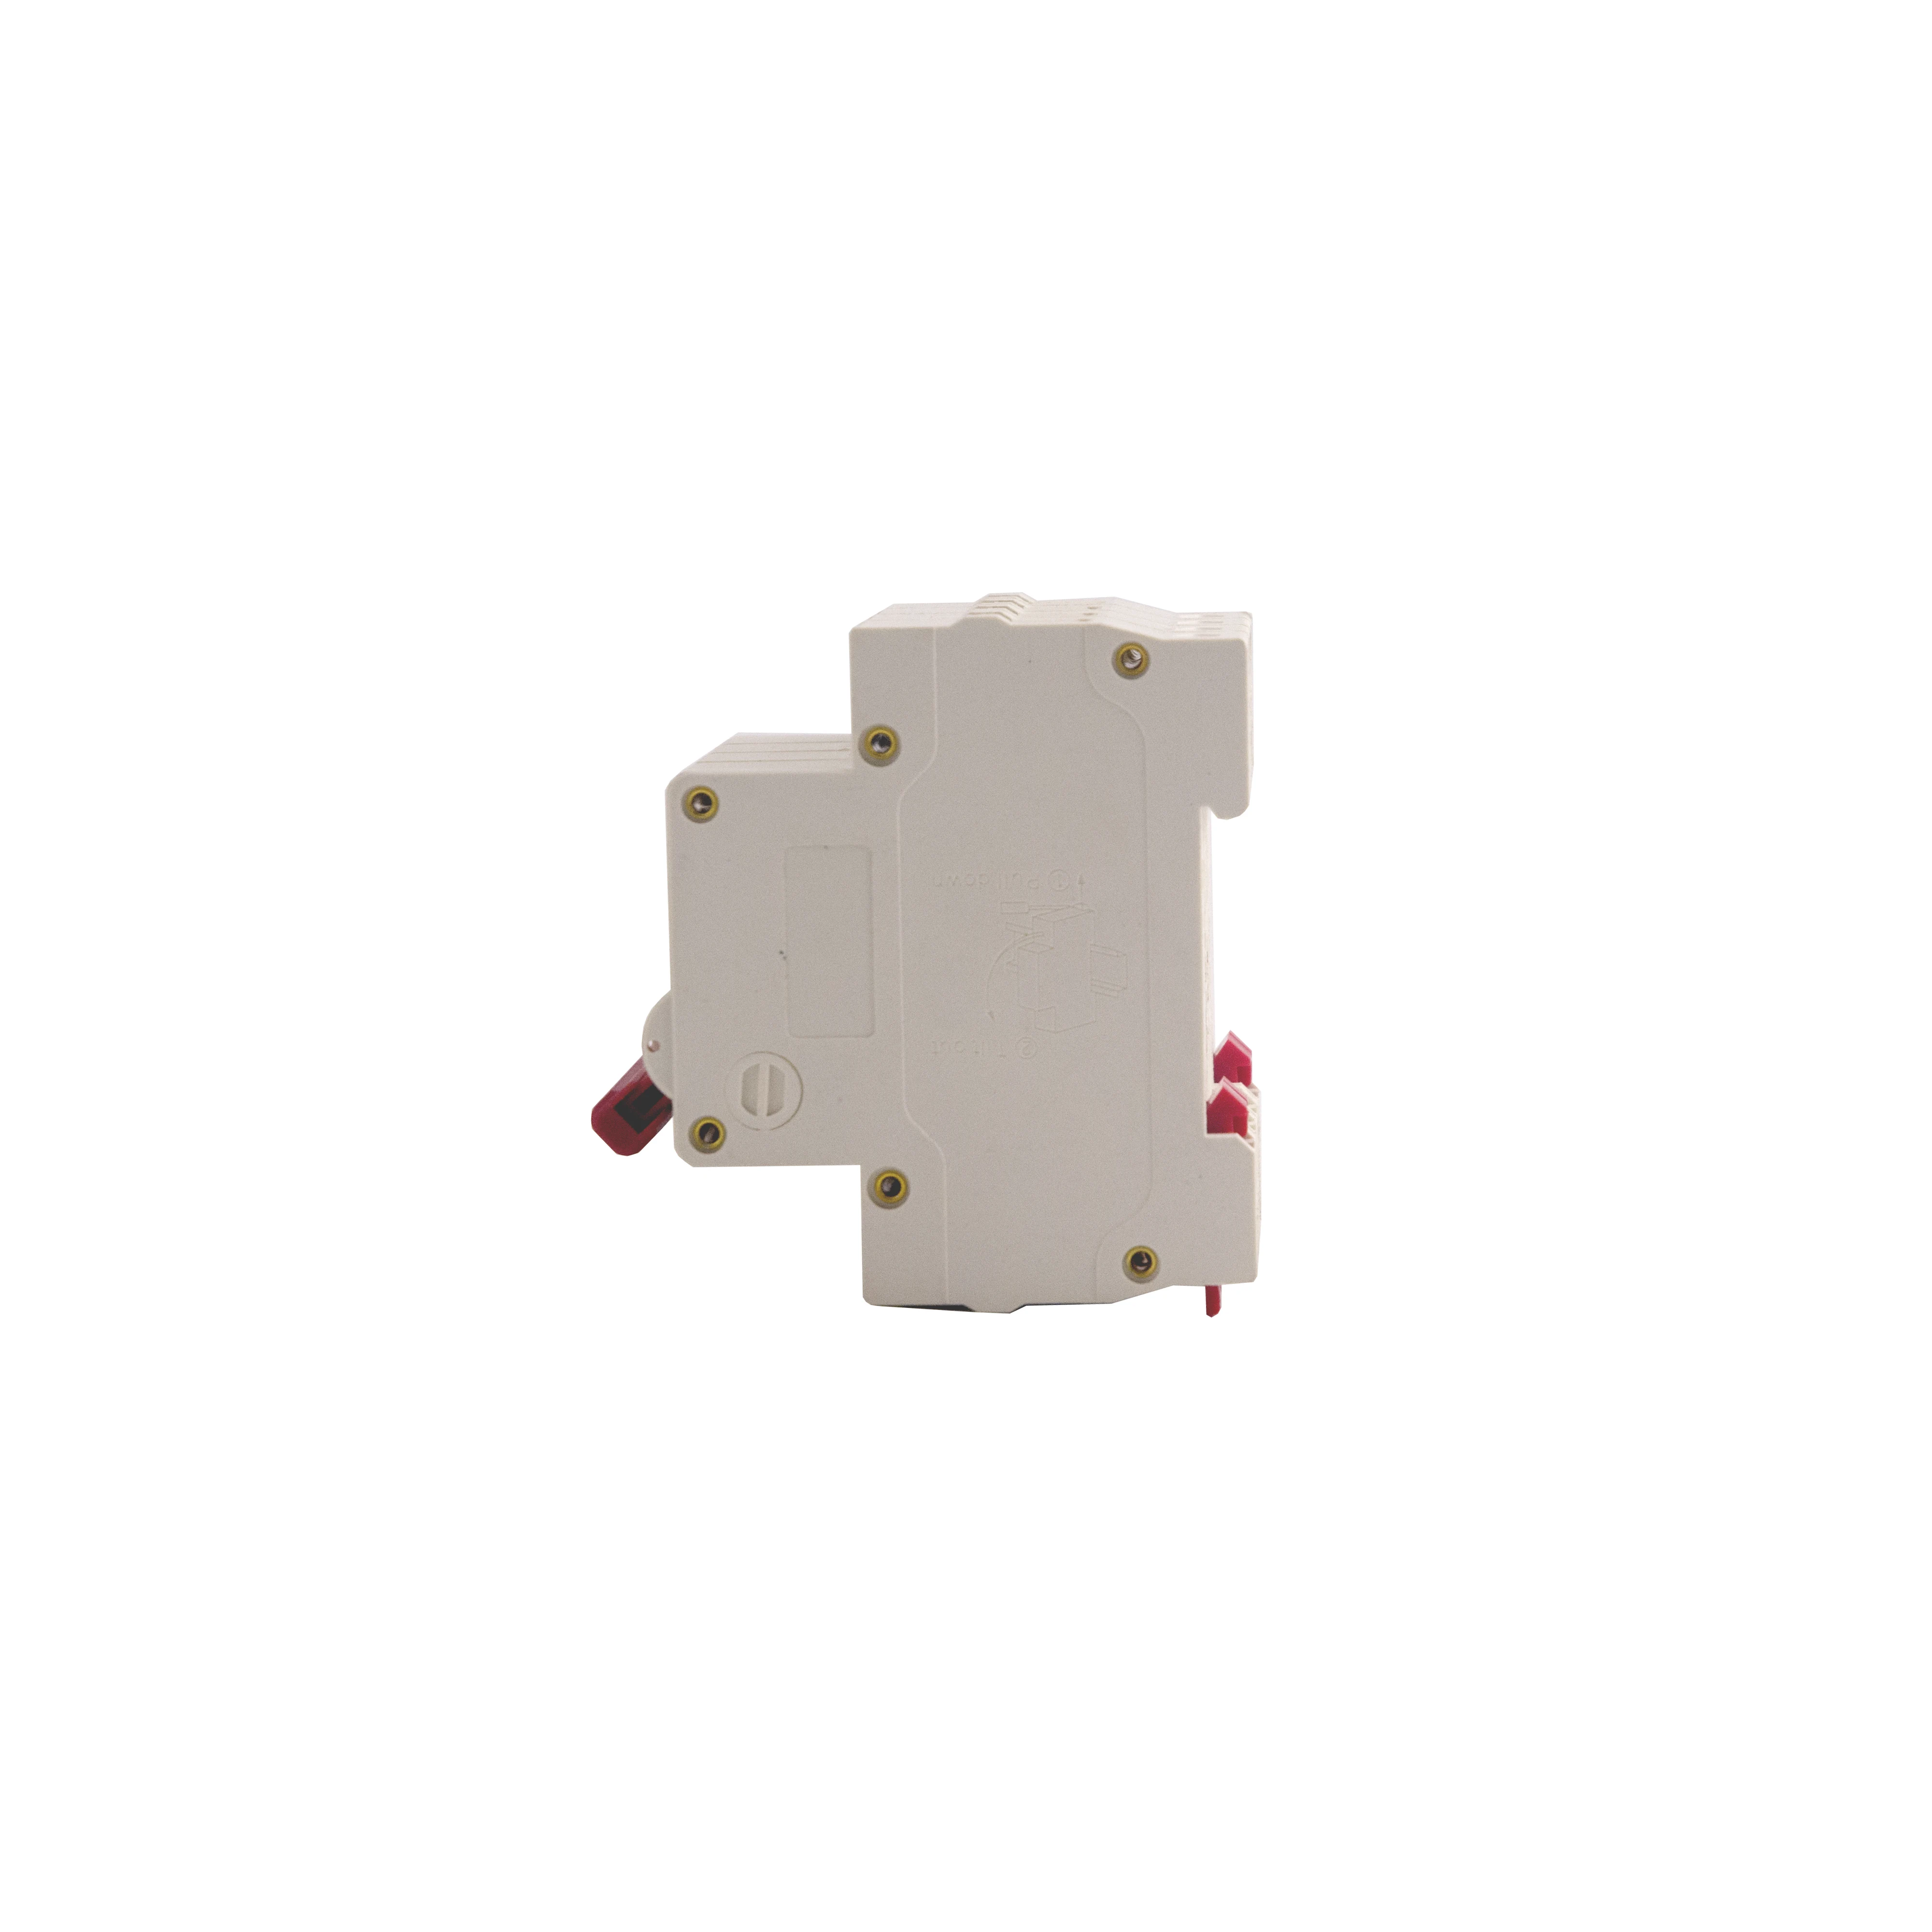 DZ47-63-4P-Miniature Circuit Breaker - Household K Air Switch Short Circuit Overload Protection